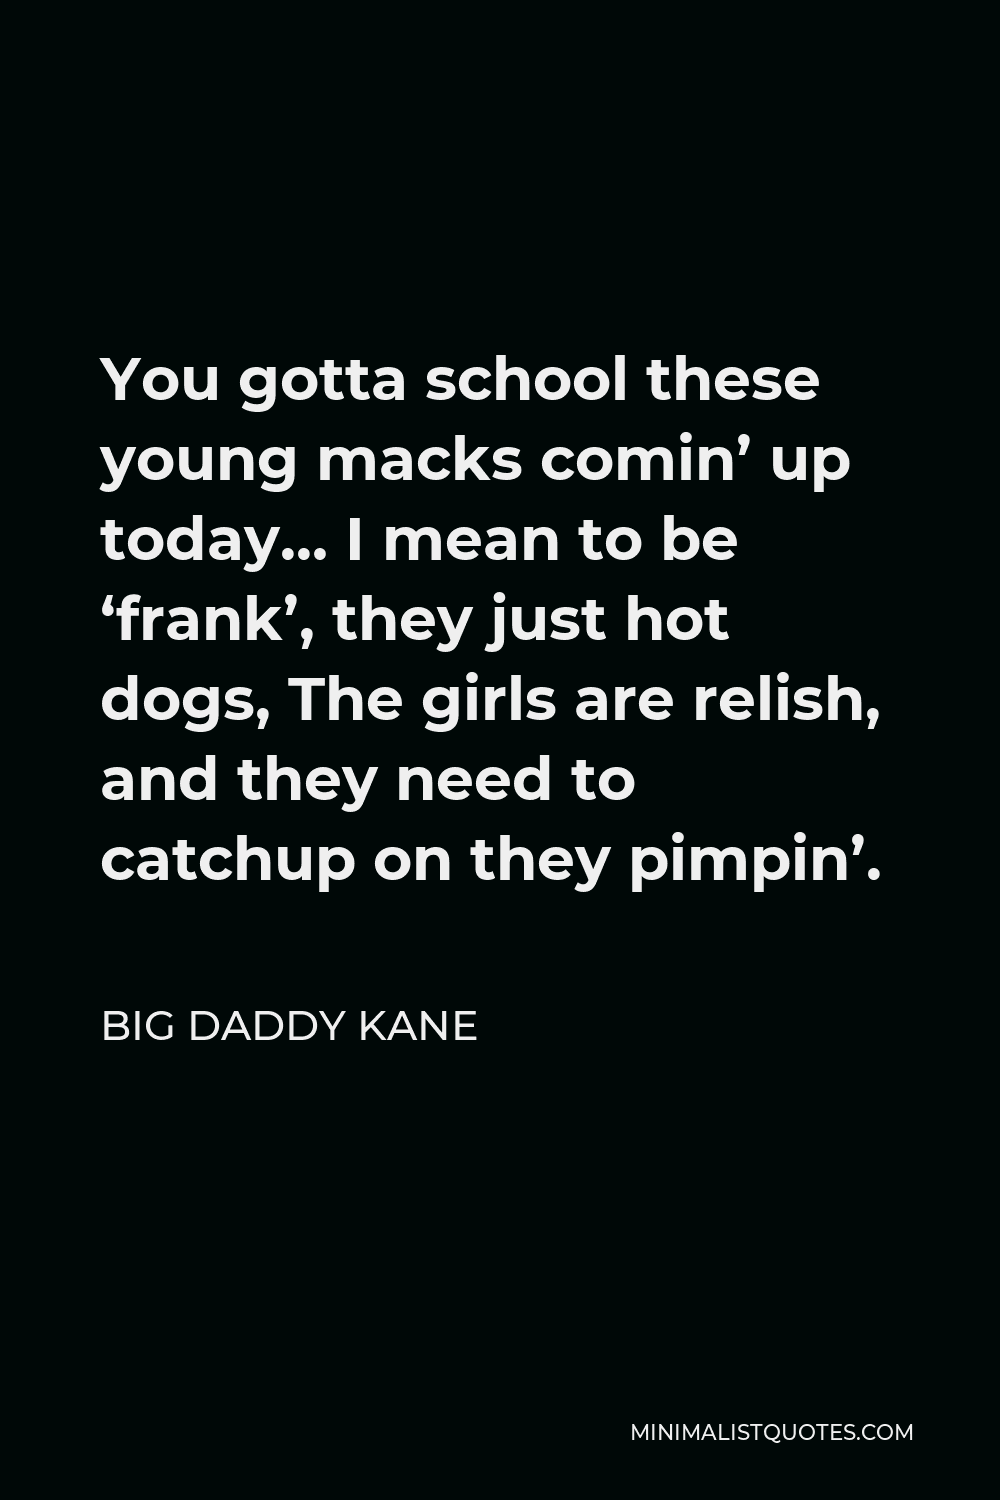 Big Daddy Kane Quote - You gotta school these young macks comin’ up today… I mean to be ‘frank’, they just hot dogs, The girls are relish, and they need to catchup on they pimpin’.